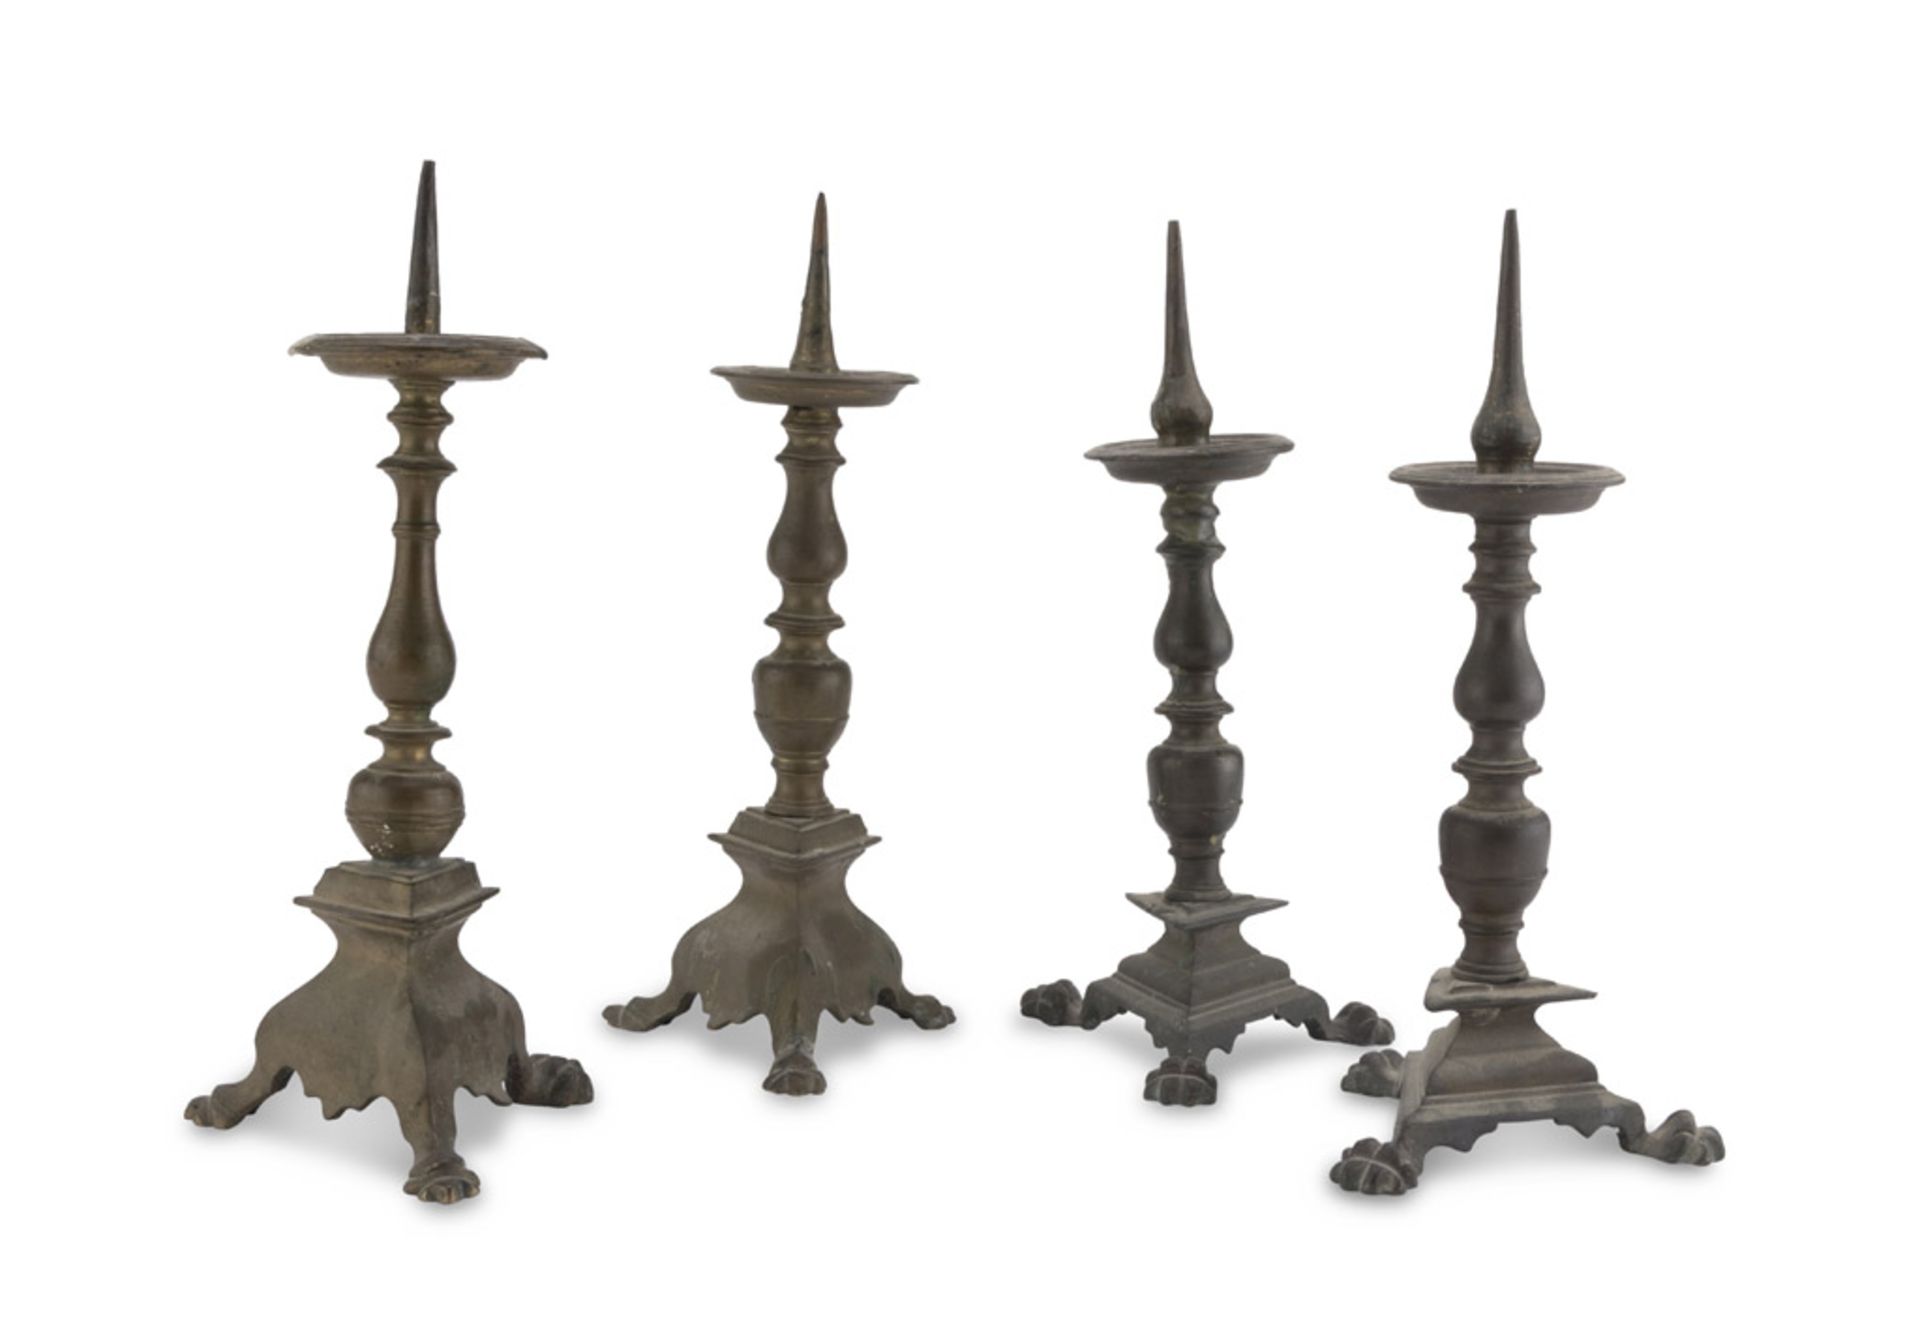 FOUR CANDLESTICKS IN BRONZE, TUSCAN, 18TH CENTURY